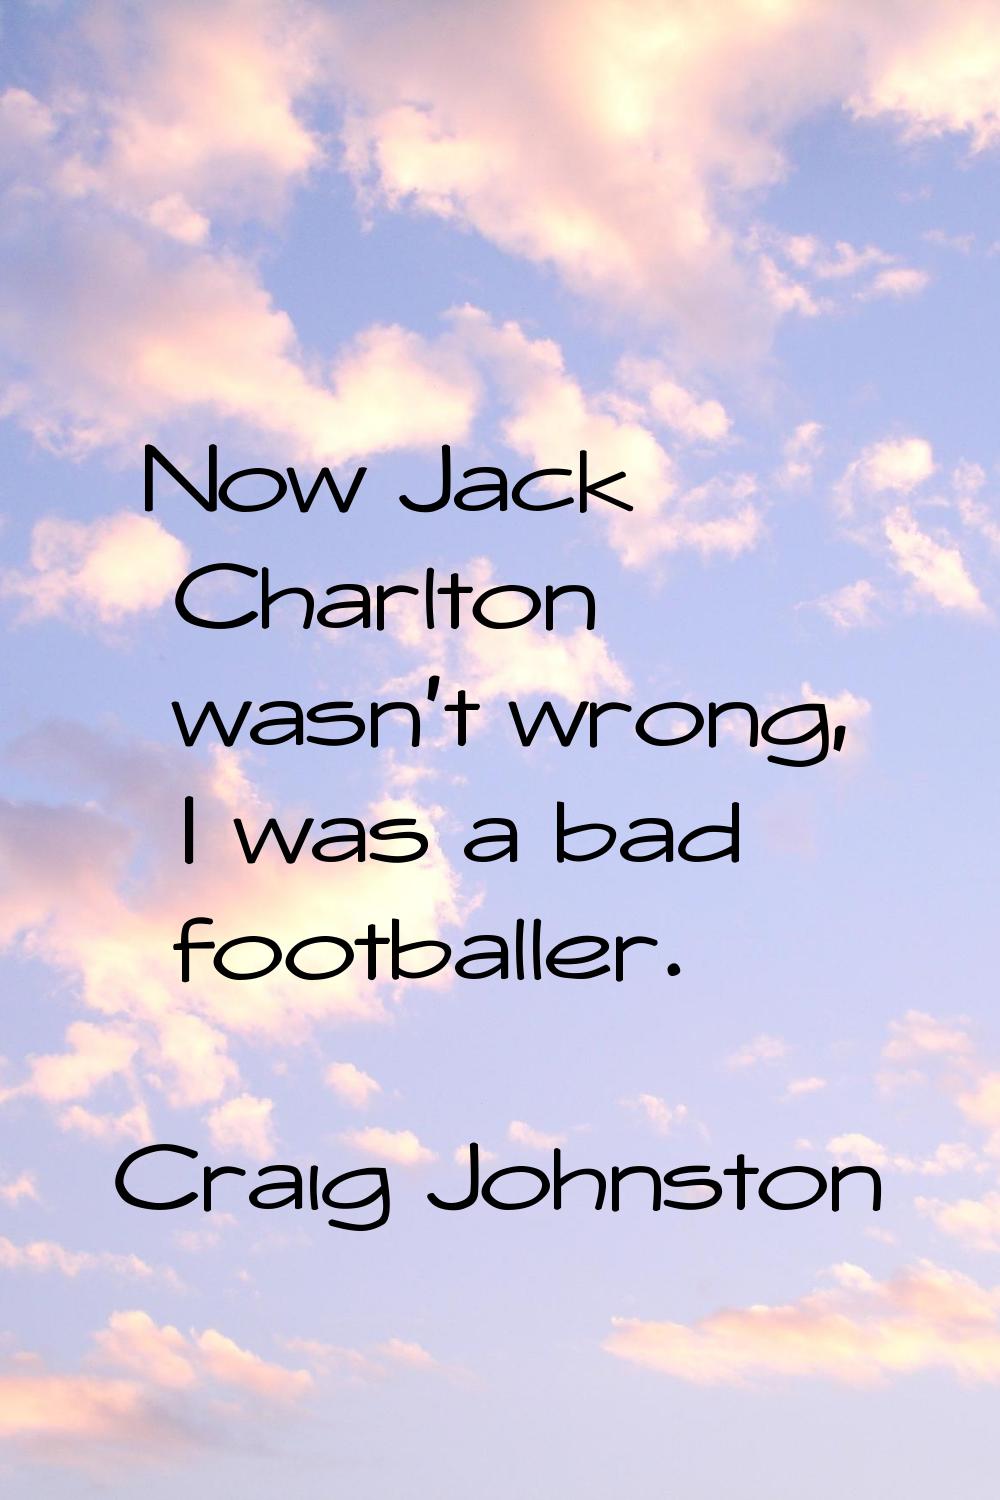 Now Jack Charlton wasn't wrong, I was a bad footballer.